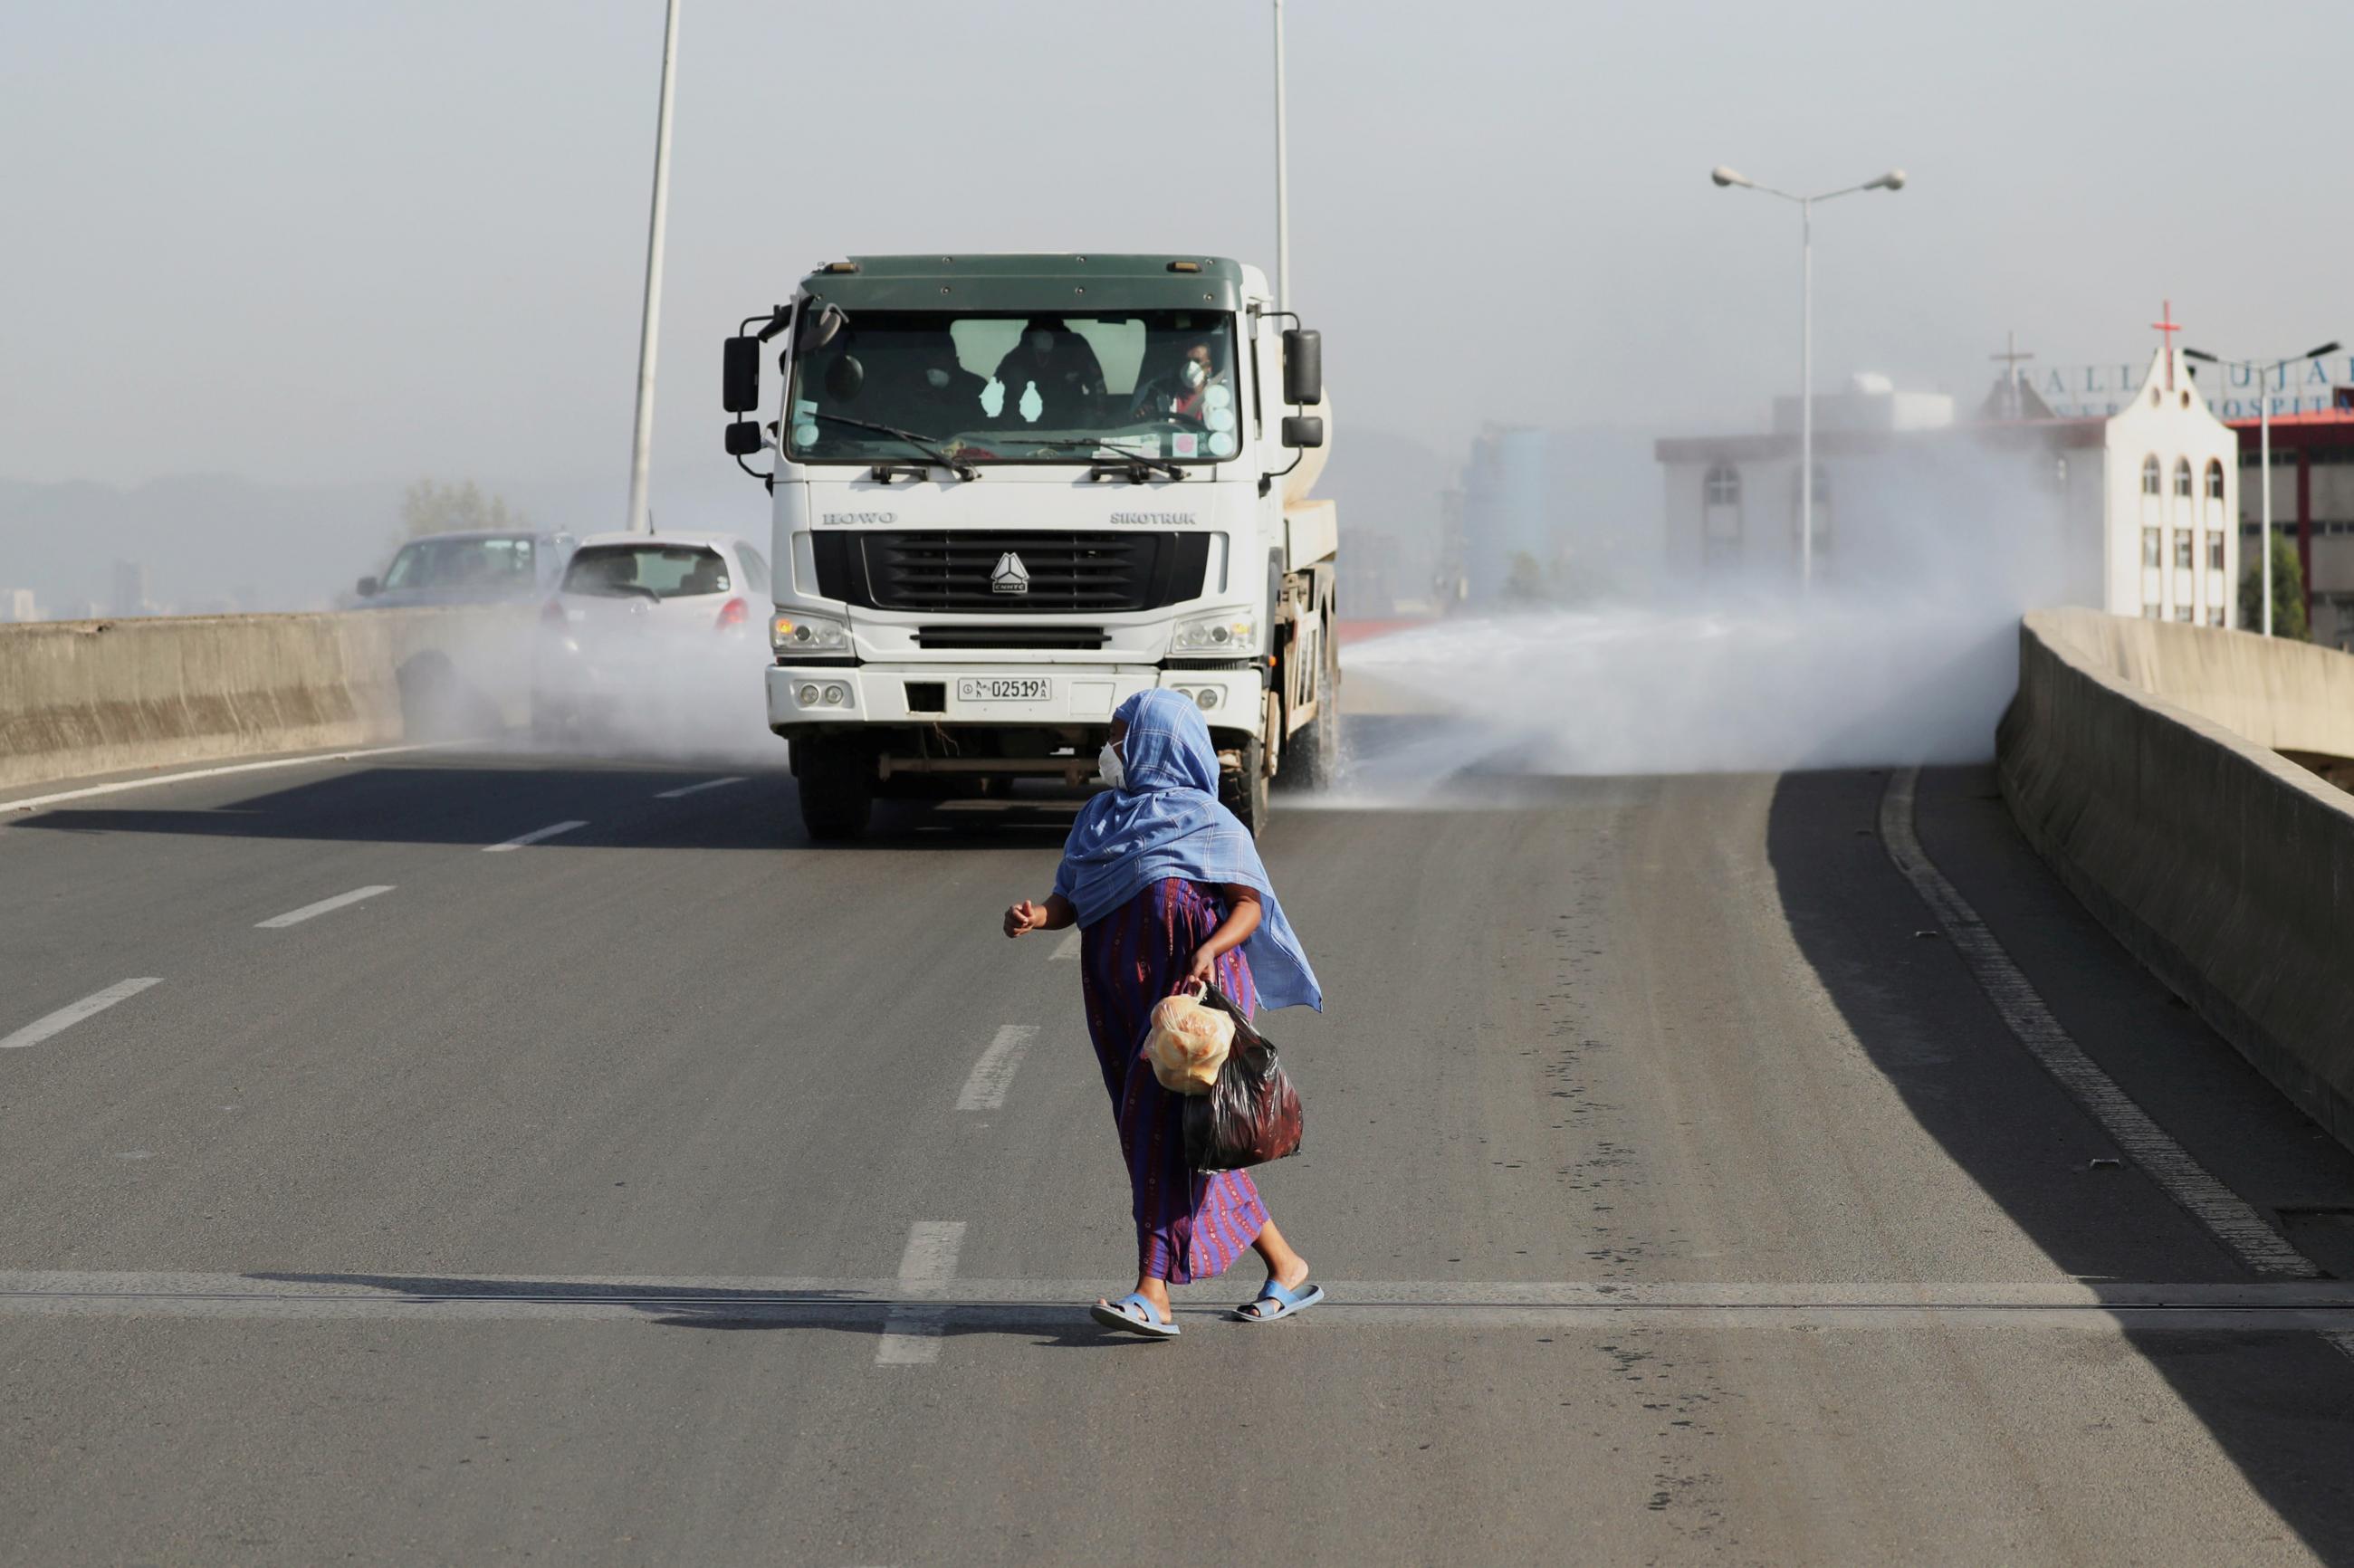 A woman wearing a face mask, runs in front of a truck spraying disinfectant on the street as part of measures to prevent the spread of COVID-19 in Addis Ababa, Ethiopia on March 29, 2020.